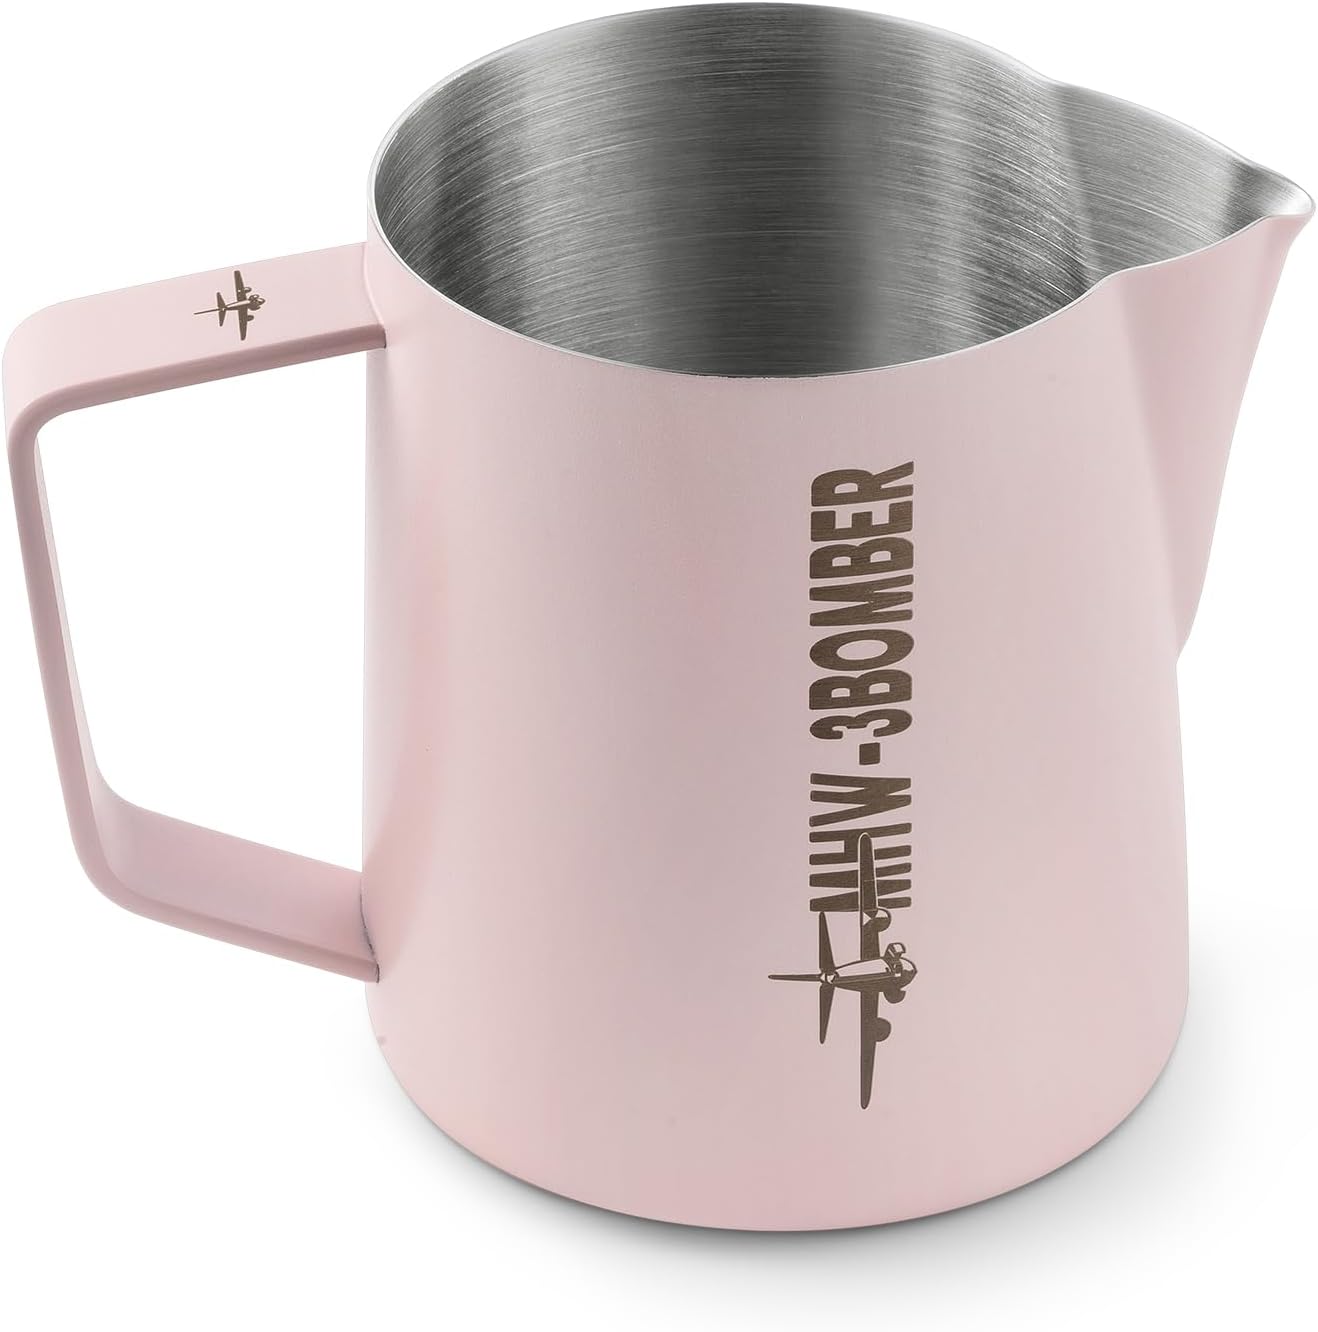 MHW-3BOMBER Milk Frothing Pitcher 16.9oz/500ml Espresso Steaming Pitcher Stainless Steel Frothing Cup Capuccino Latte Art Pitcher, Pink P5017